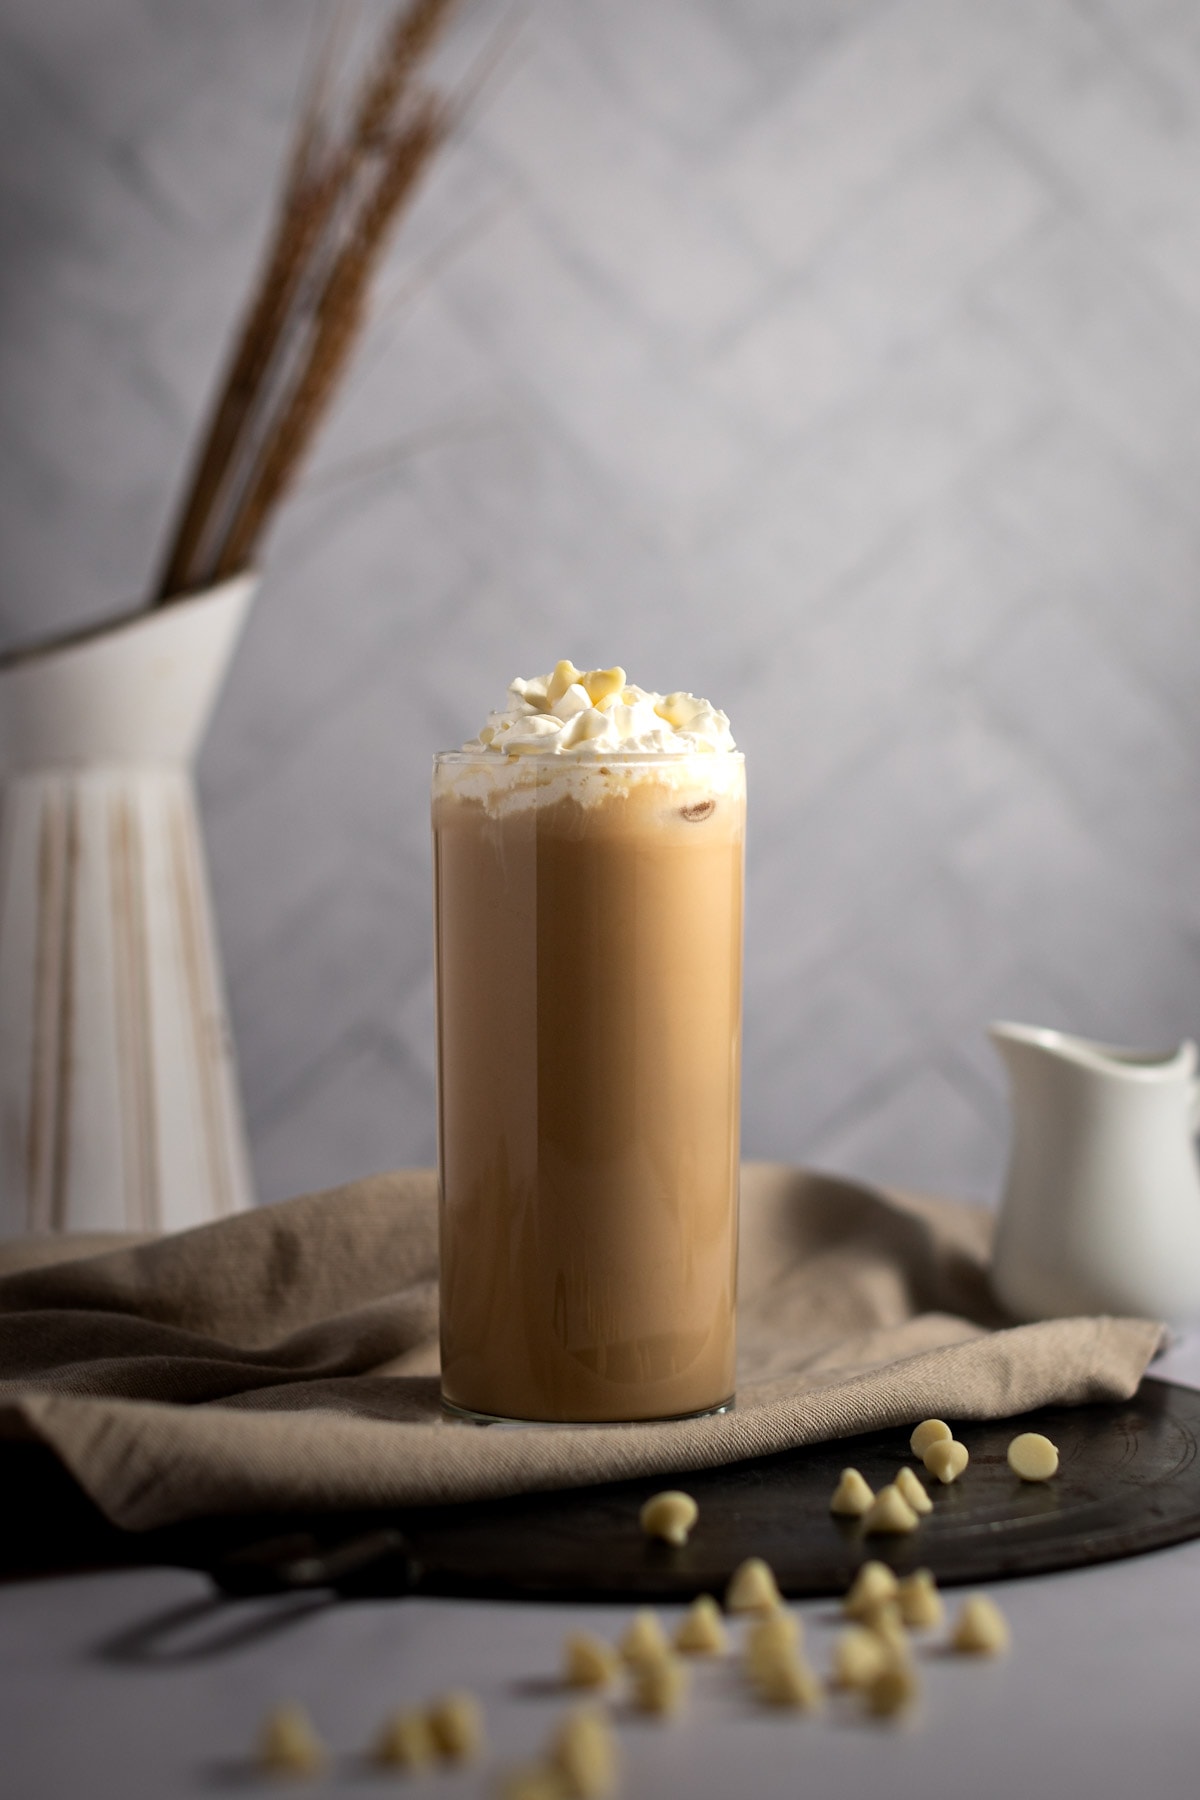 A tall glass of iced white chocolate mocha, topped with whipped cream and white chocolate chips, on a brown napkin and grey background.